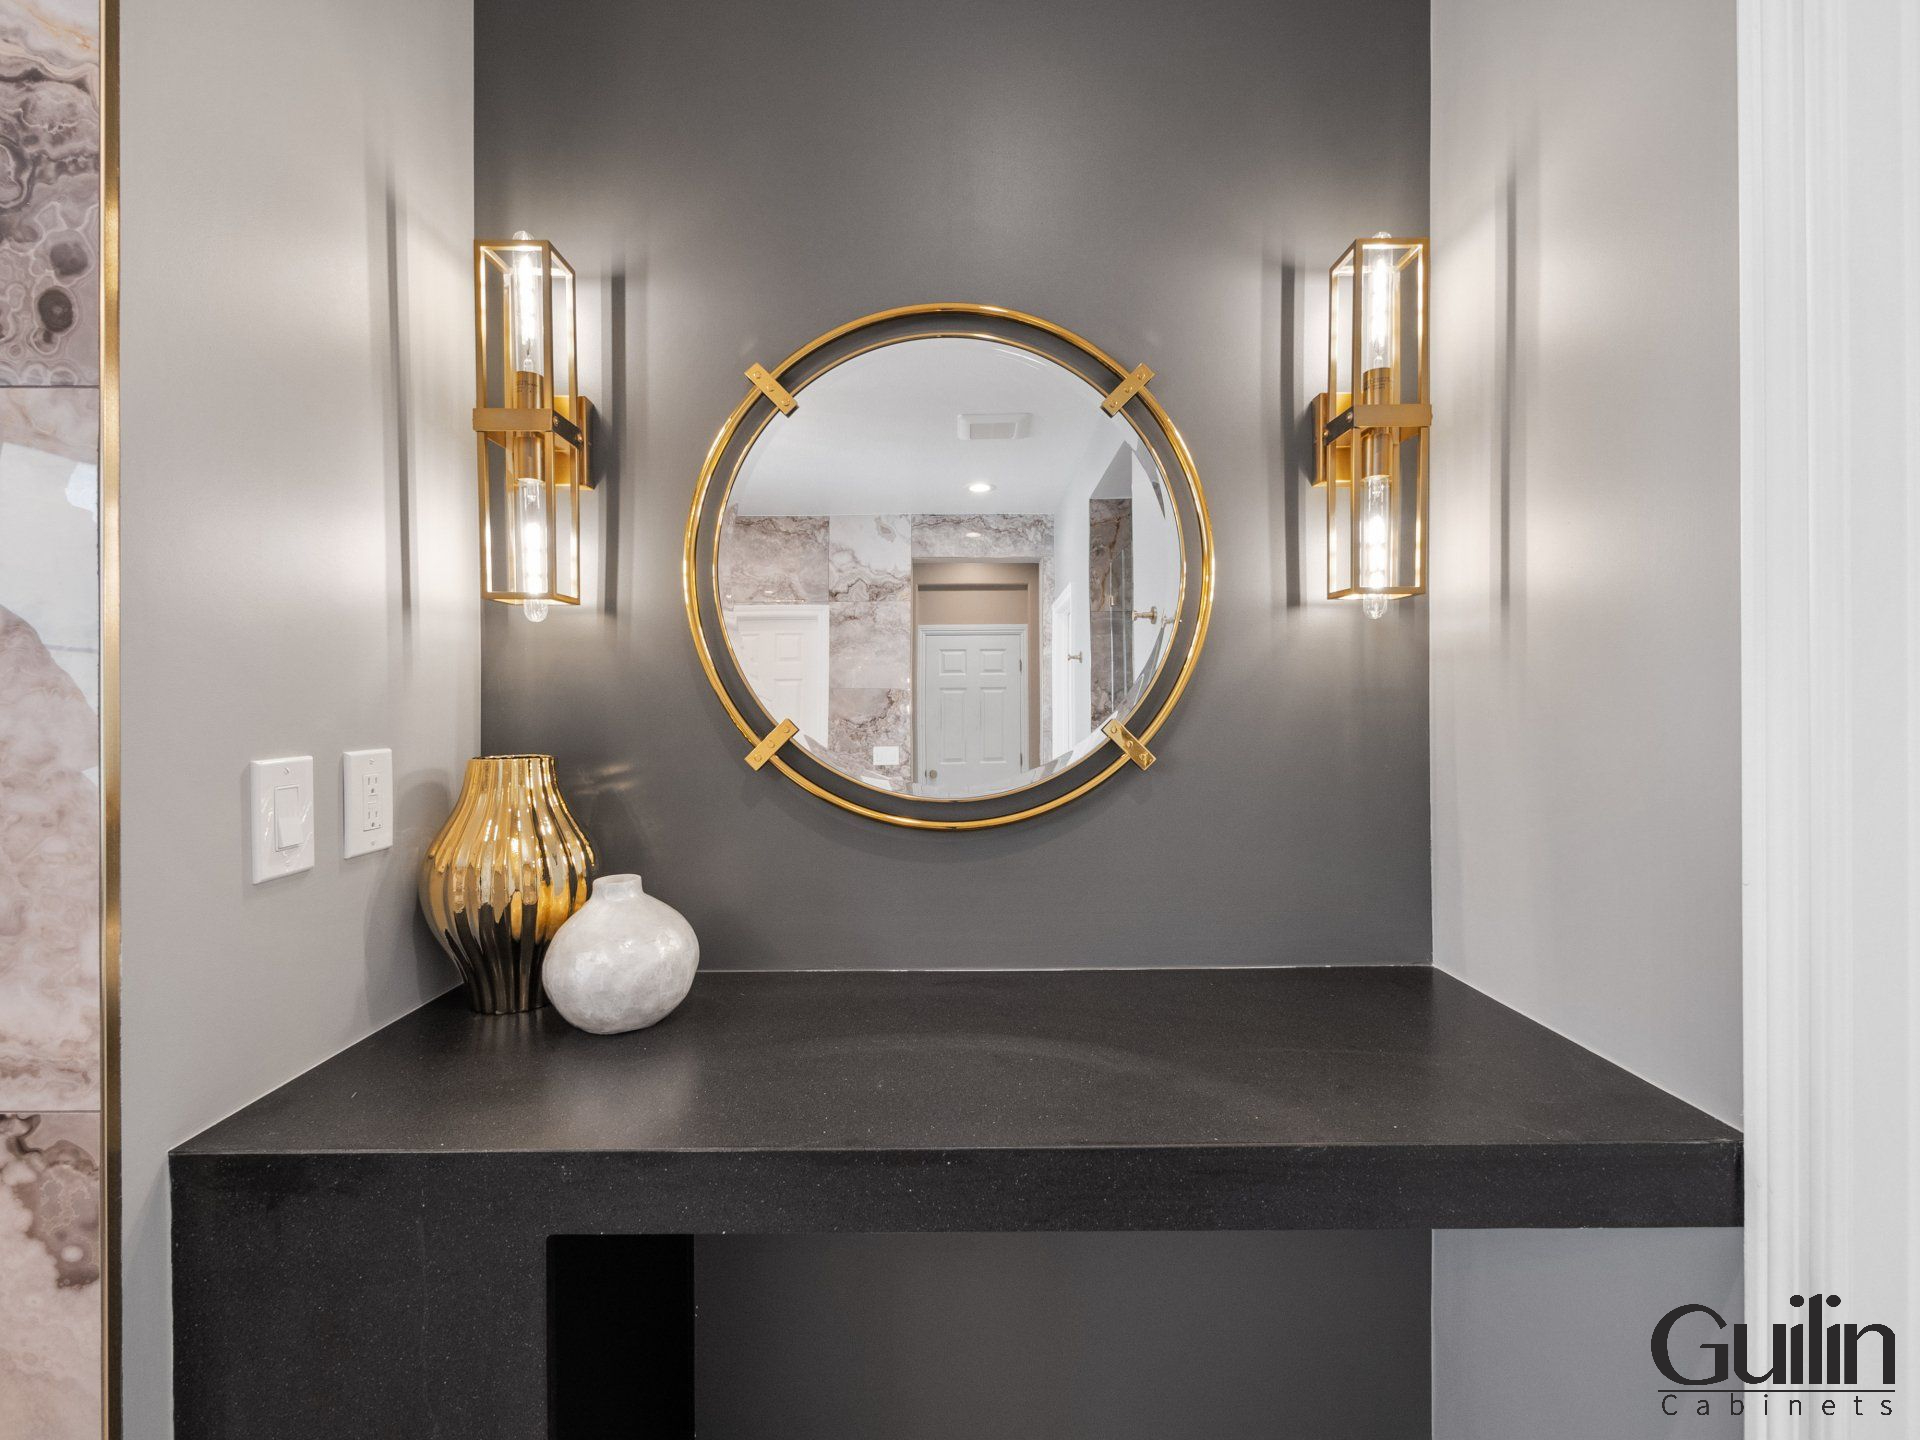 Depending on the vanity design and overall style of the bathroom, vanity countertops can come in many shapes, including rectangular, oval, round, square, and even custom shapes.